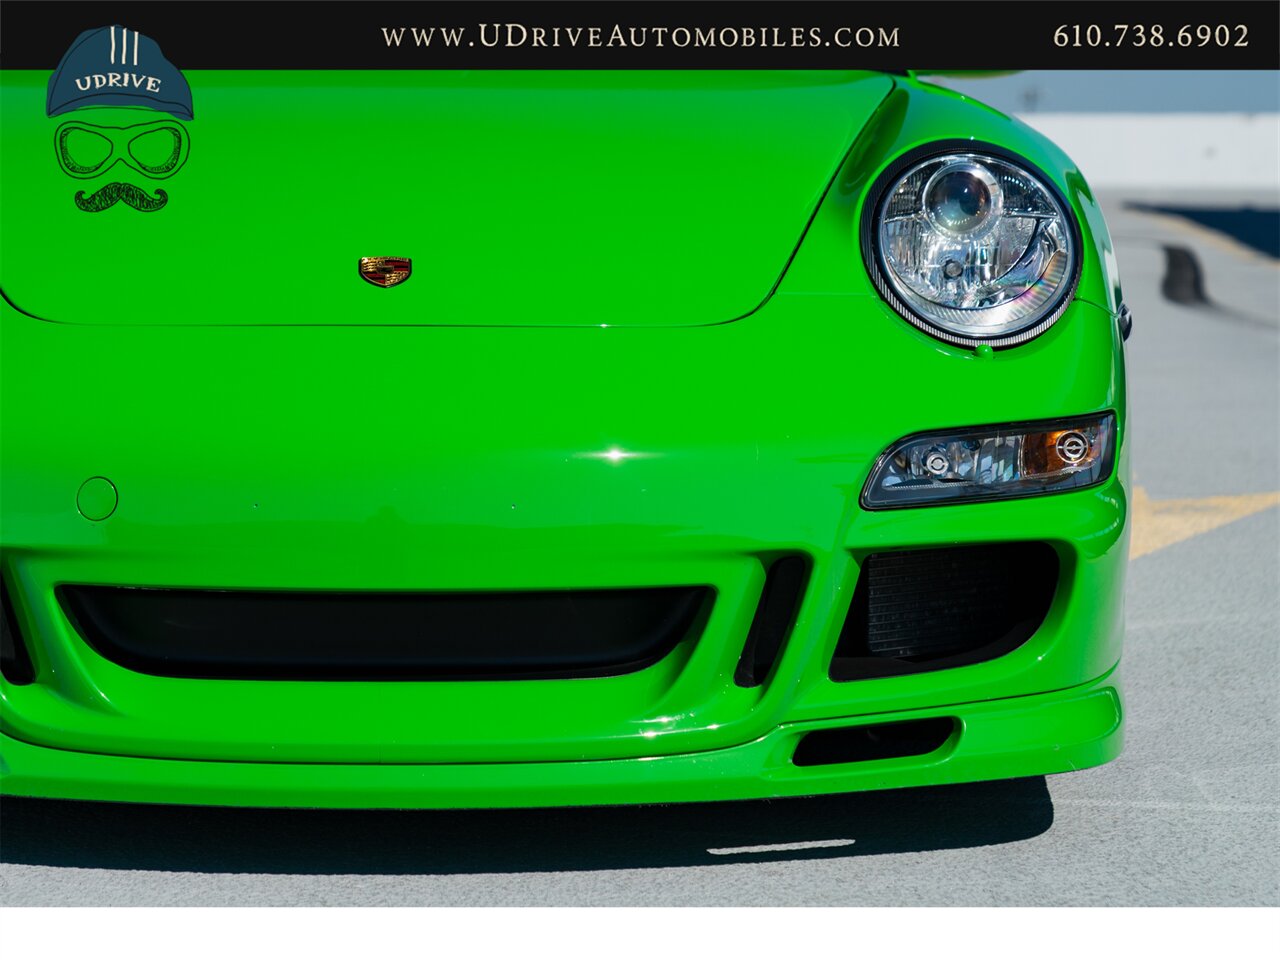 2006 Porsche 911 Carrera 4S  997 PTS Signal Green 6Sp Sport Sts Spt Chrono Spt Exhst - Photo 13 - West Chester, PA 19382